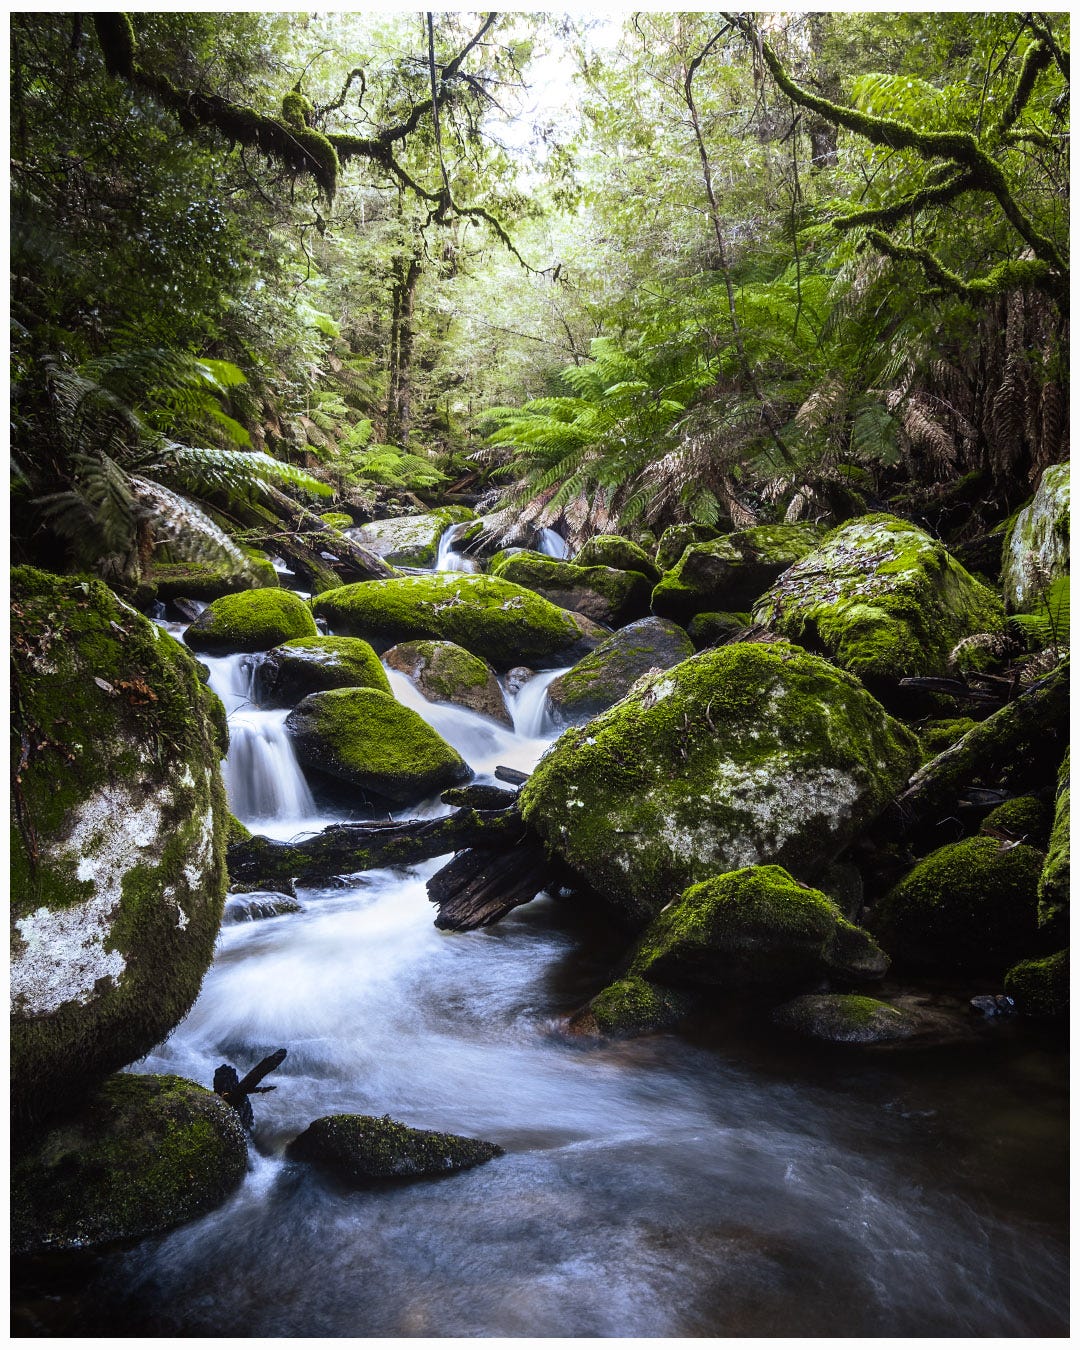 A mountain stream cascading through moss covered boulders, surrounded by vegetation of every shade